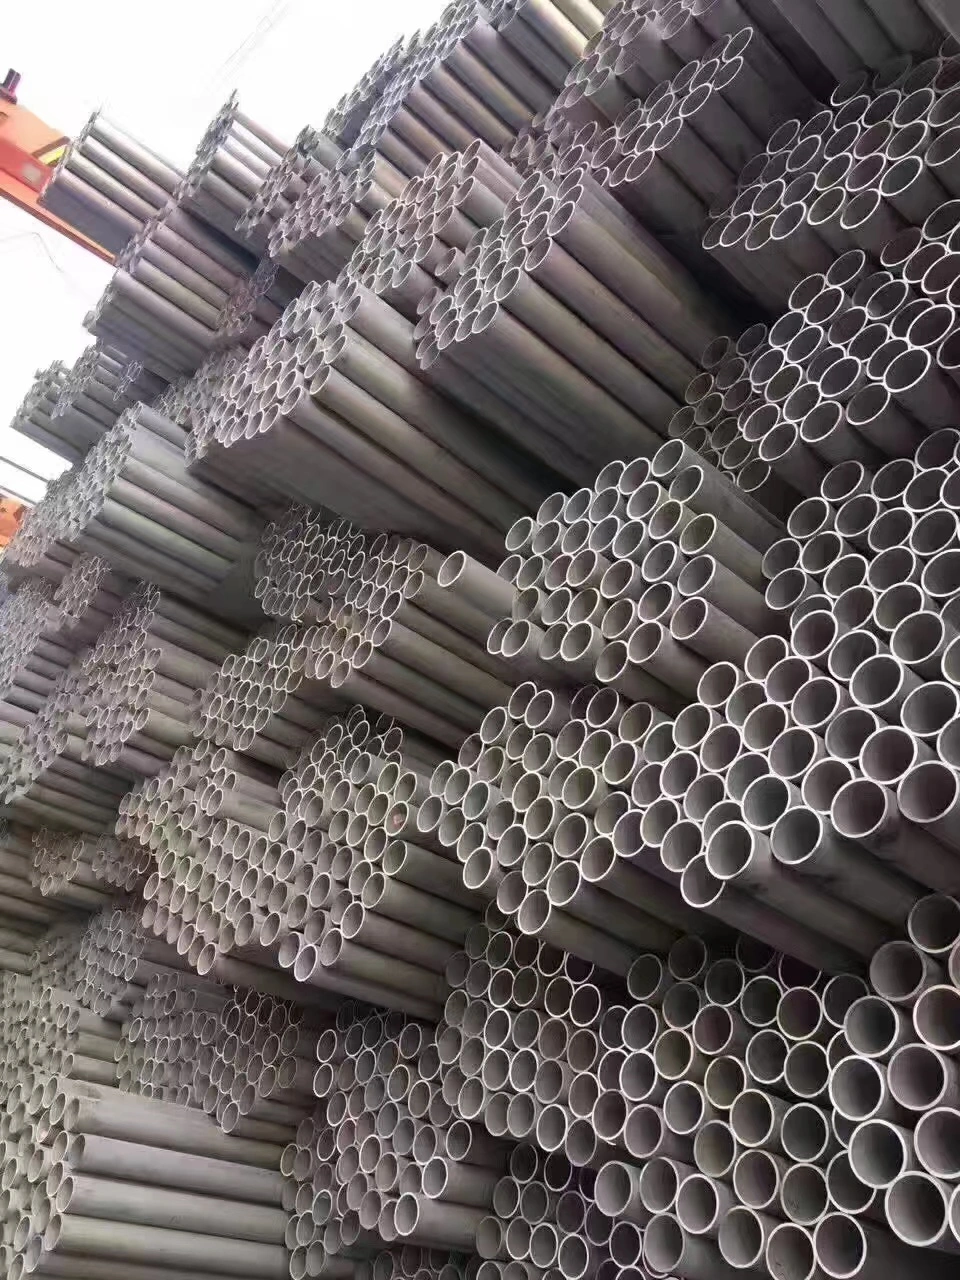 ASTM 304L Stainless Steel Welded Pipe Sanitary Piping Price Stainless Steel Pipe/Tube